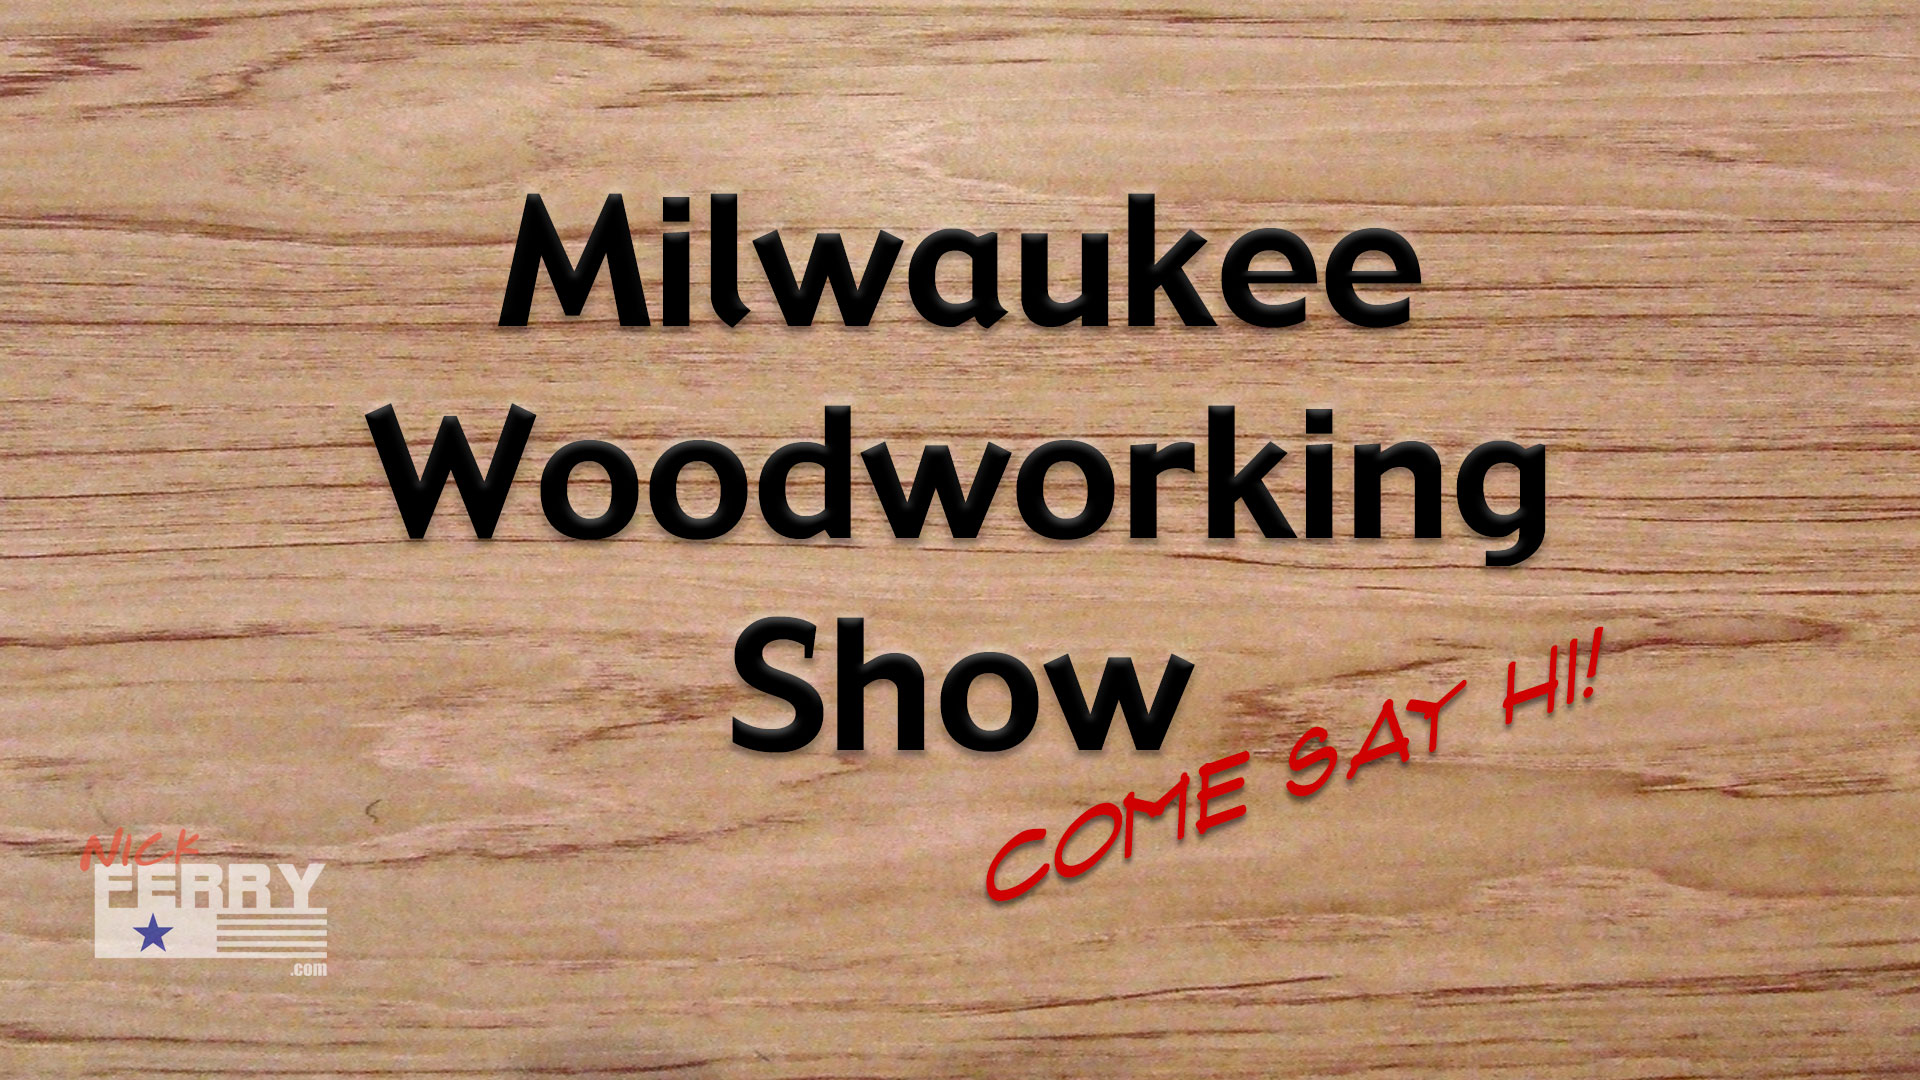 The Woodworking Shows Milwaukee 2016 | Let’s Meet!